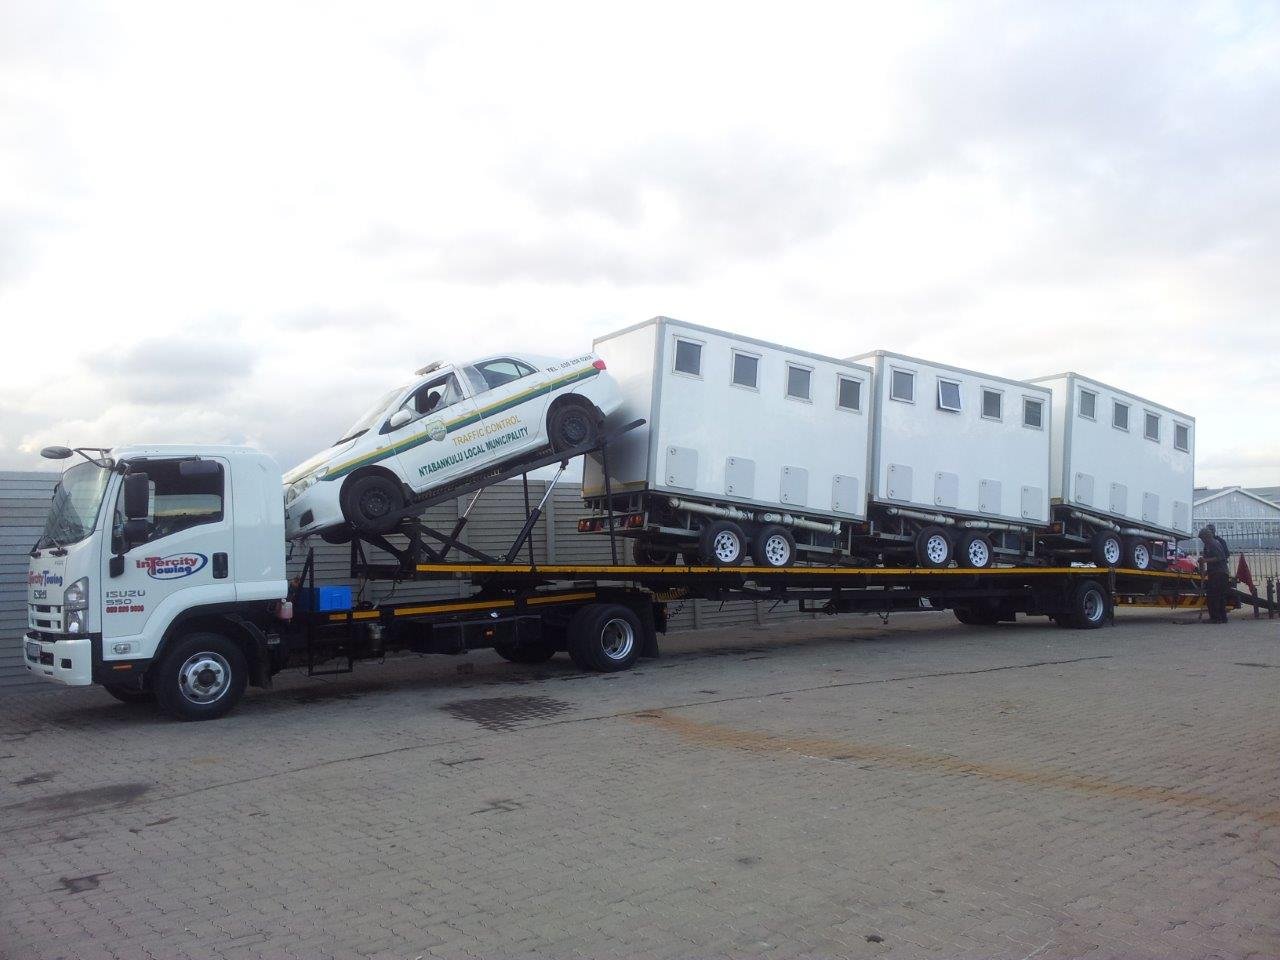 10 Reasons Why Intercity Auto Movers Equipment Transport Is #1